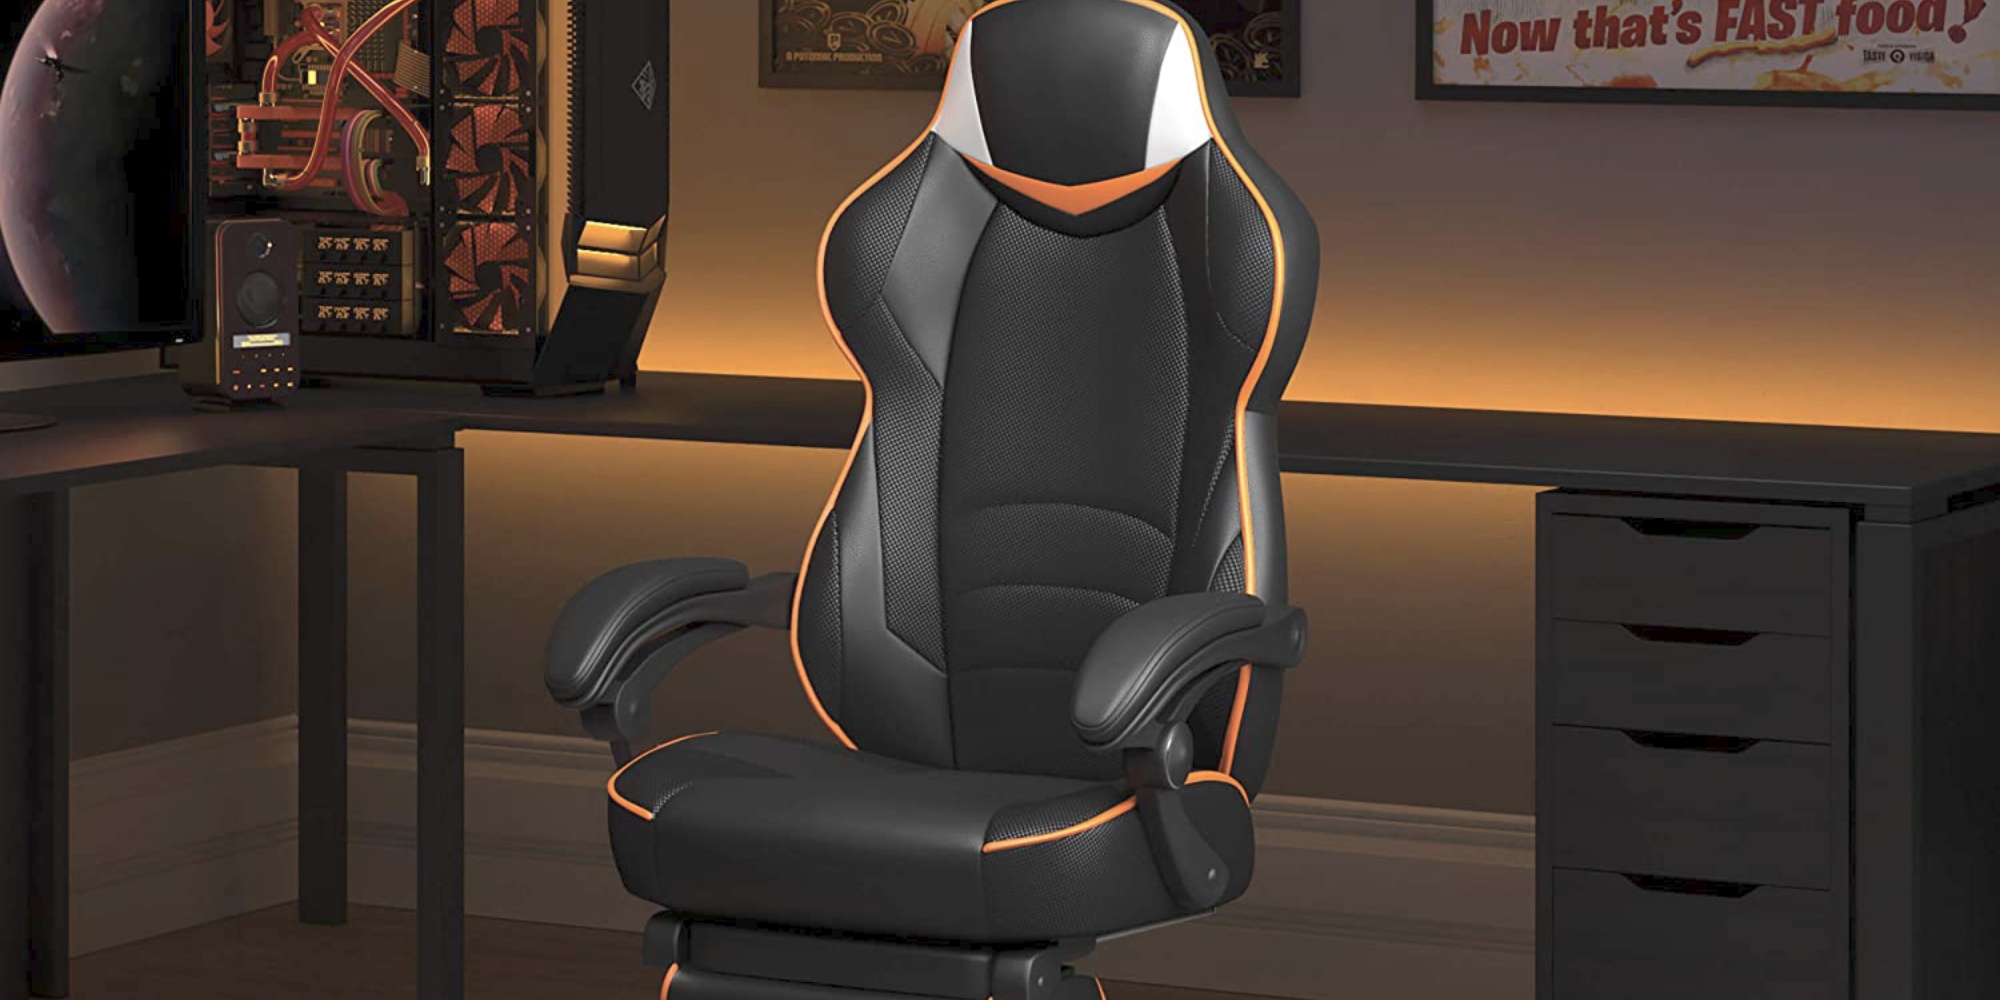 Respawn S Omega Xi Reclining Gaming Chair Plunges To 152 At Amazon Save 98 9to5toys